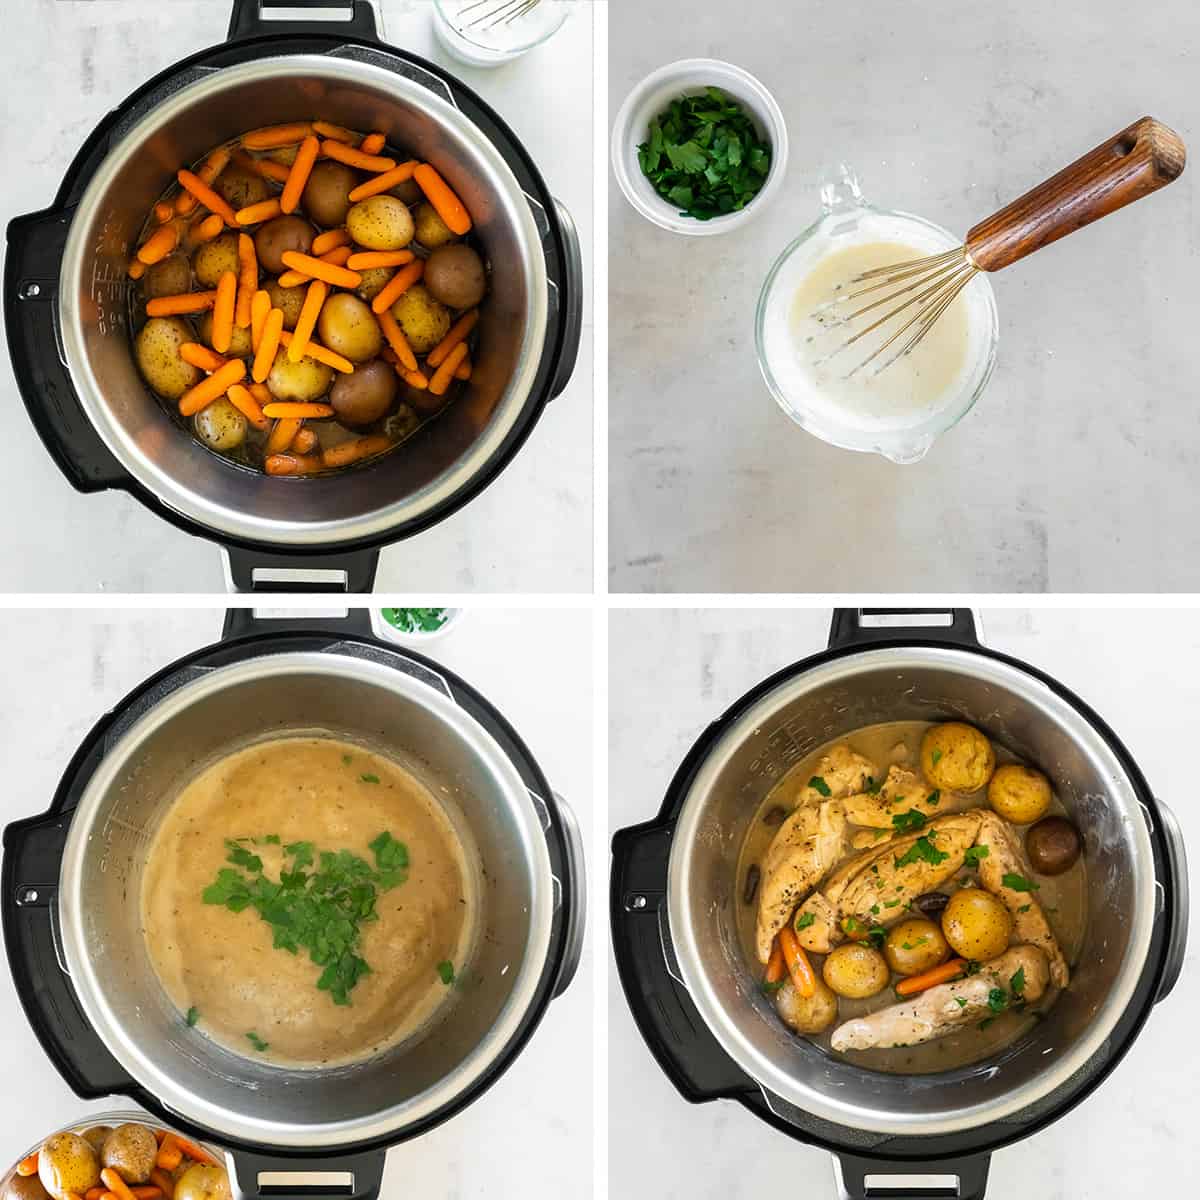 Gravy is made in an Instant Pot and chicken and vegetables are placed in it.